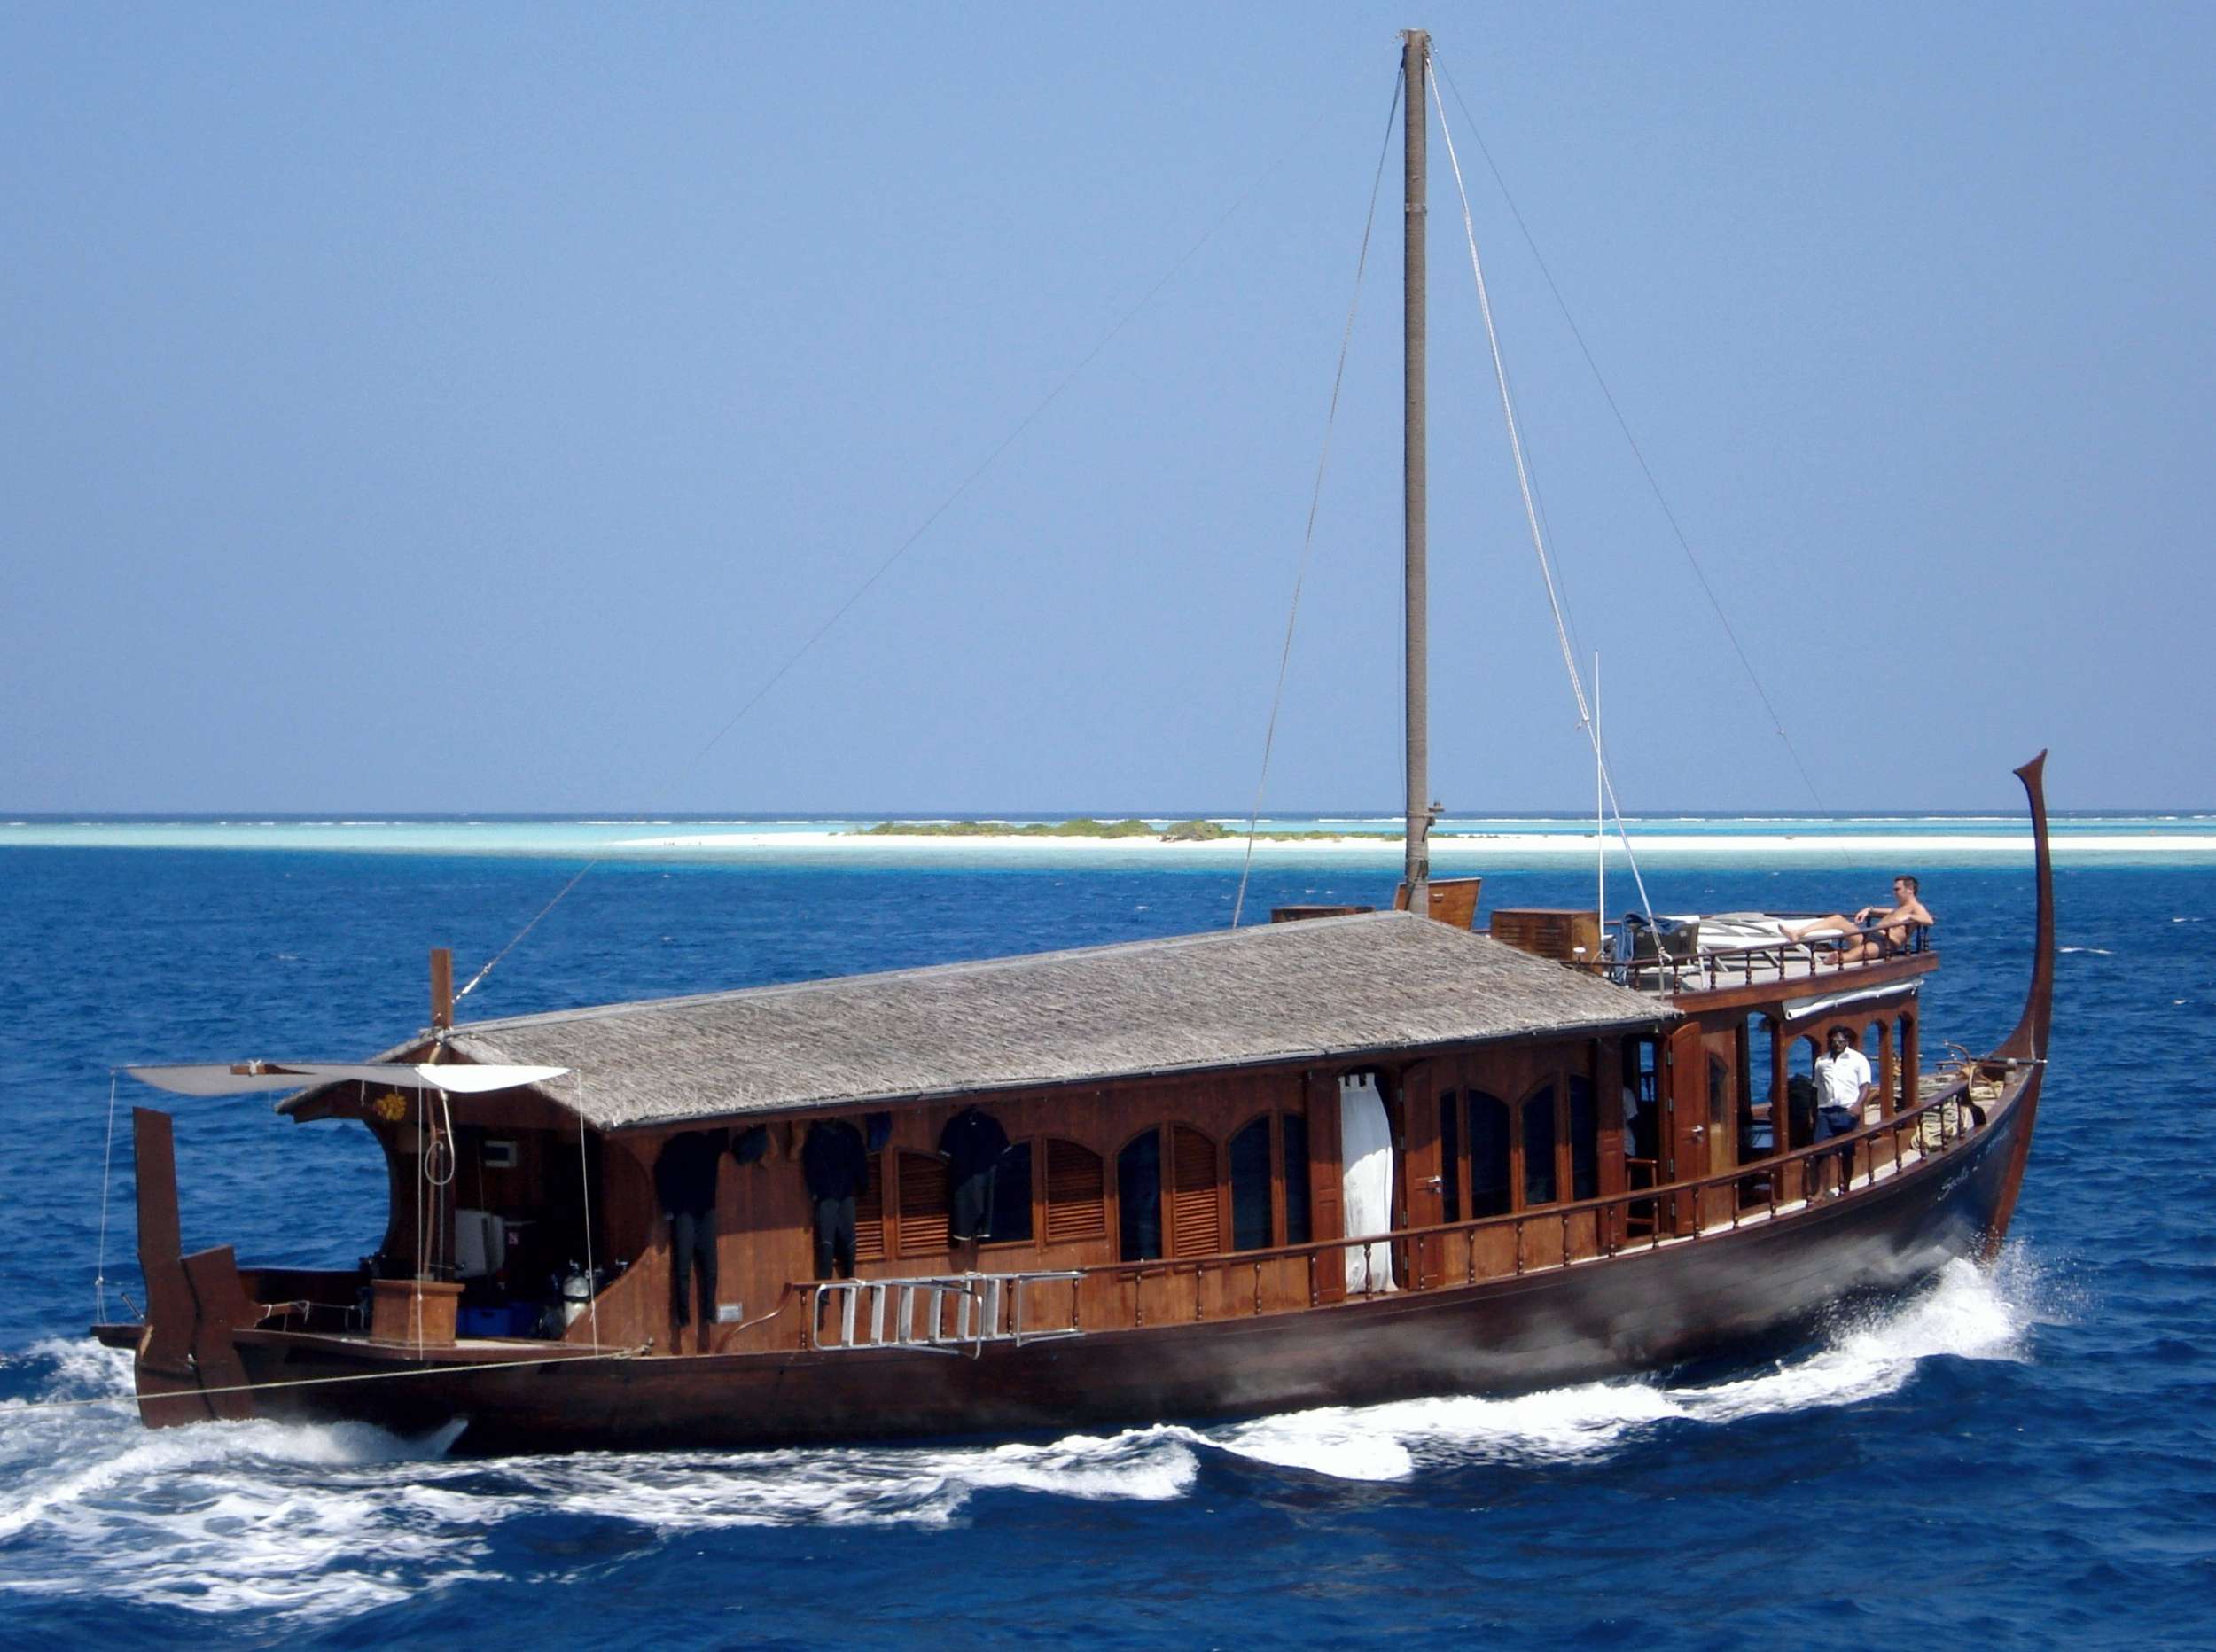 DHONI STELLA 2 - Motor Boat Charter Thailand & Boat hire in Indian Ocean & SE Asia 1